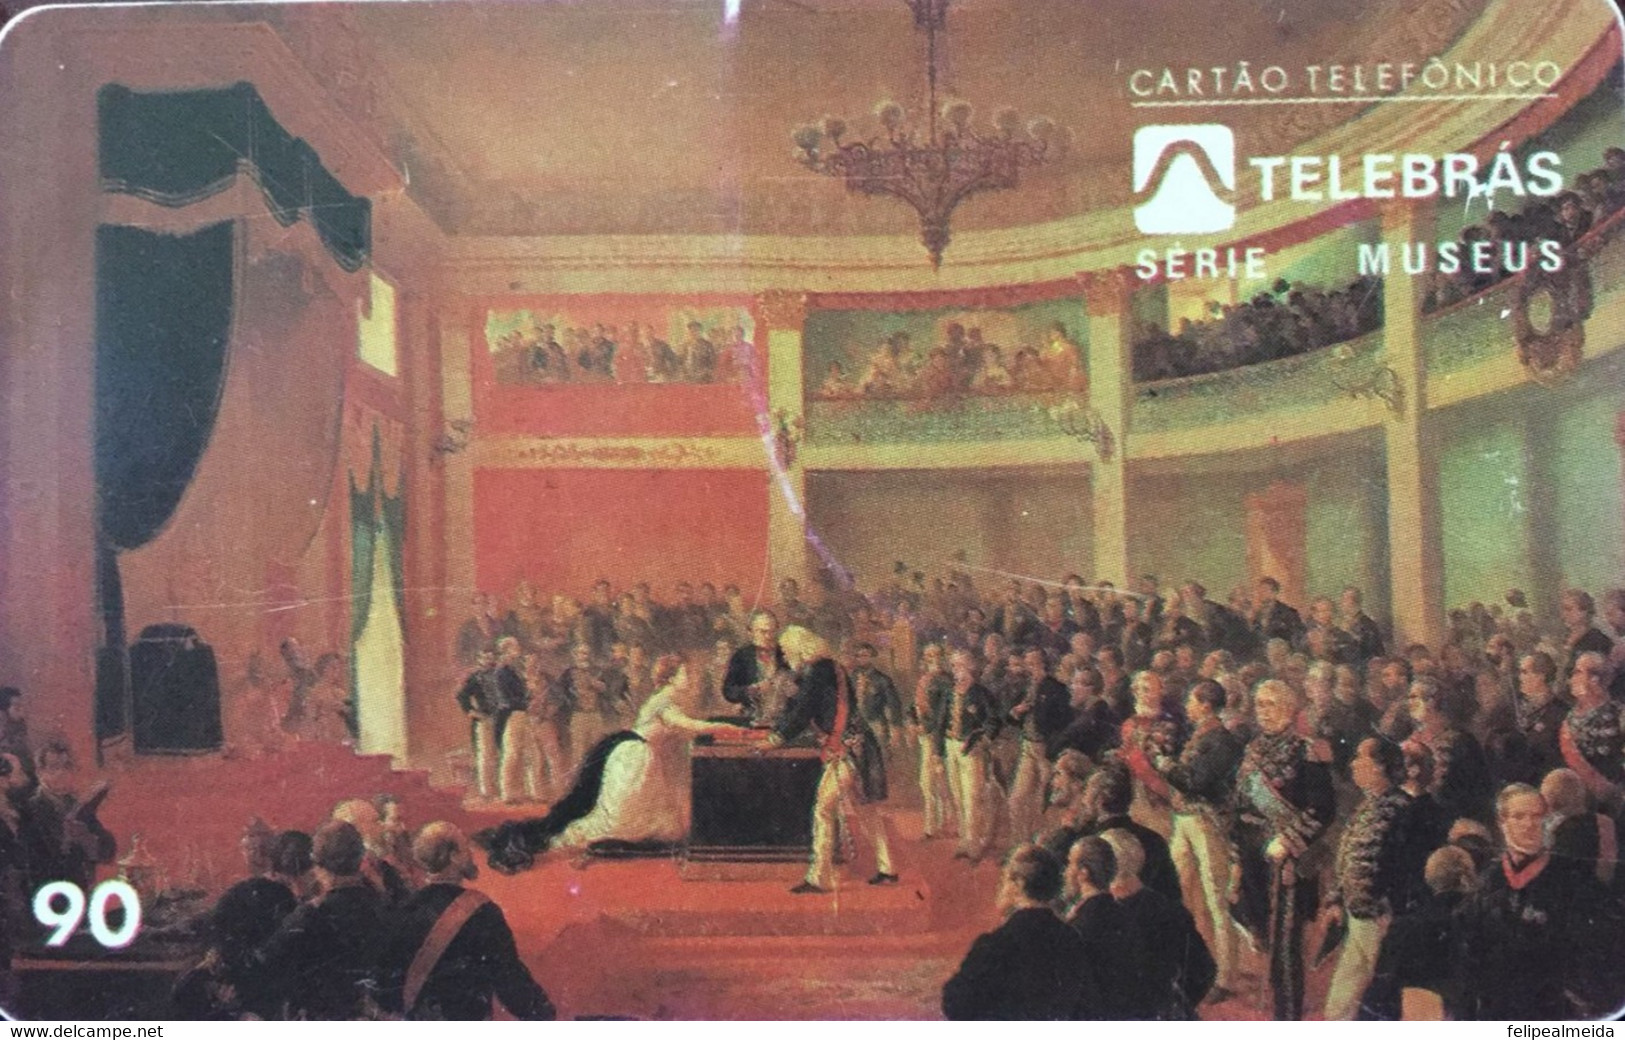 Phone Card Manufactured By Telebras In 1996 - Museum Series - Painting Oath Of Princess Isabel - Painter Victor Meirelle - Pittura